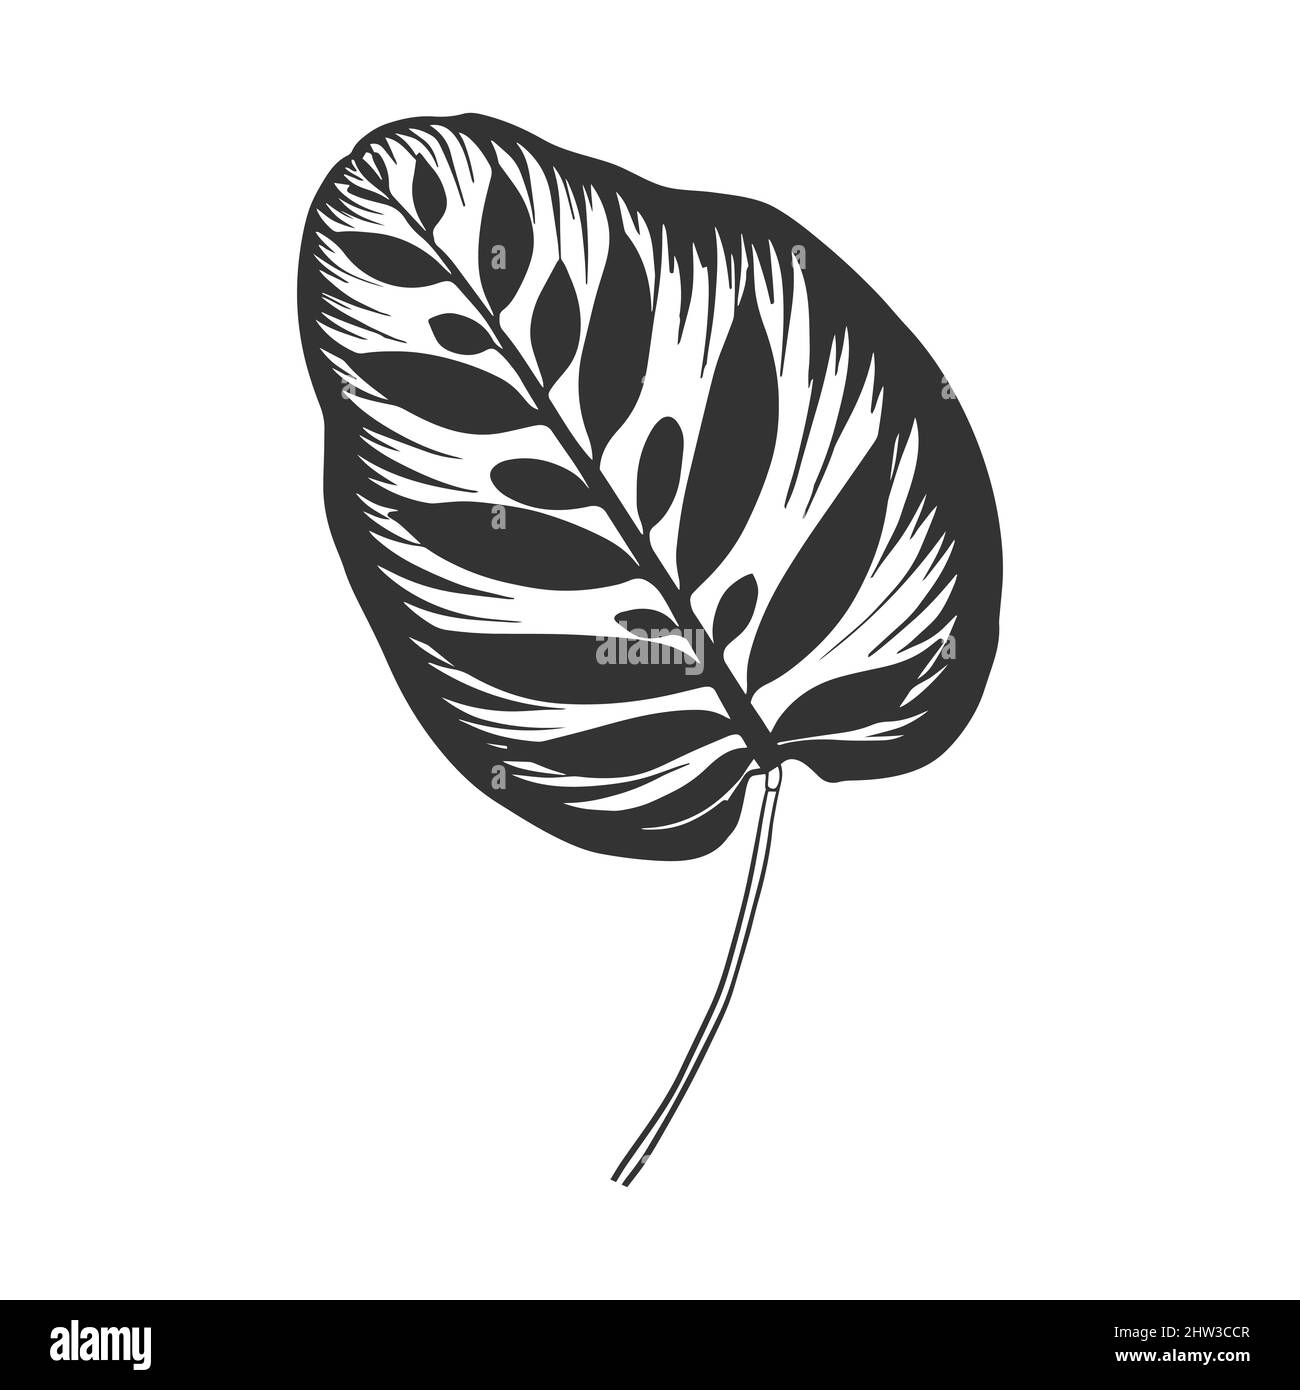 Contour drawing of a tropical plant. Calathea makoyana Leaf. Doodle style. Stock Vector